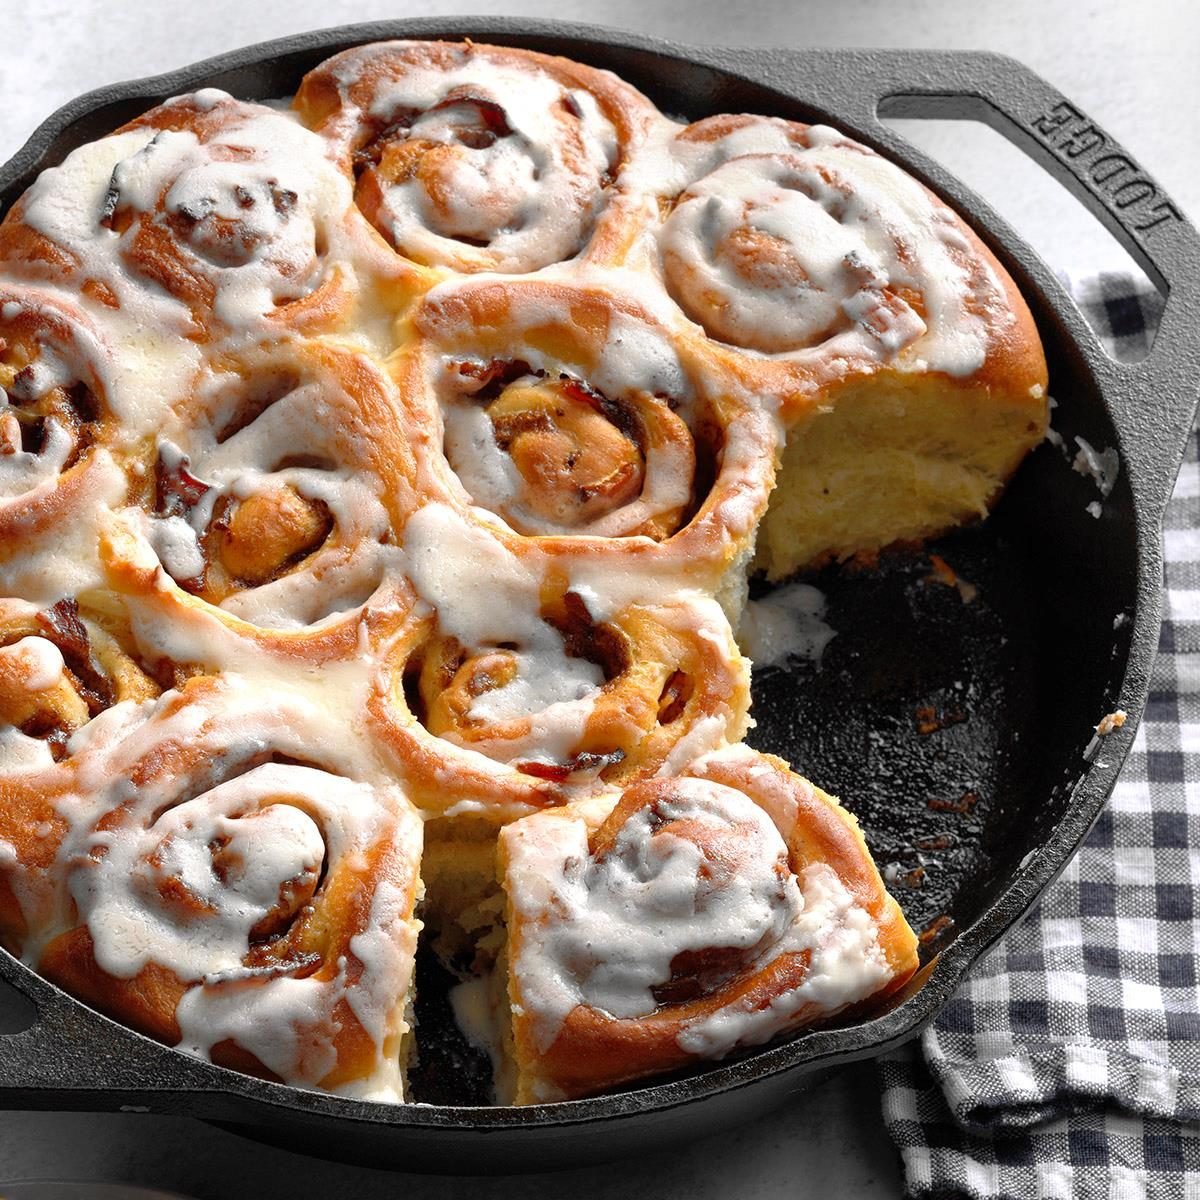 Skillet Cinnamon Rolls with Caramel Topping